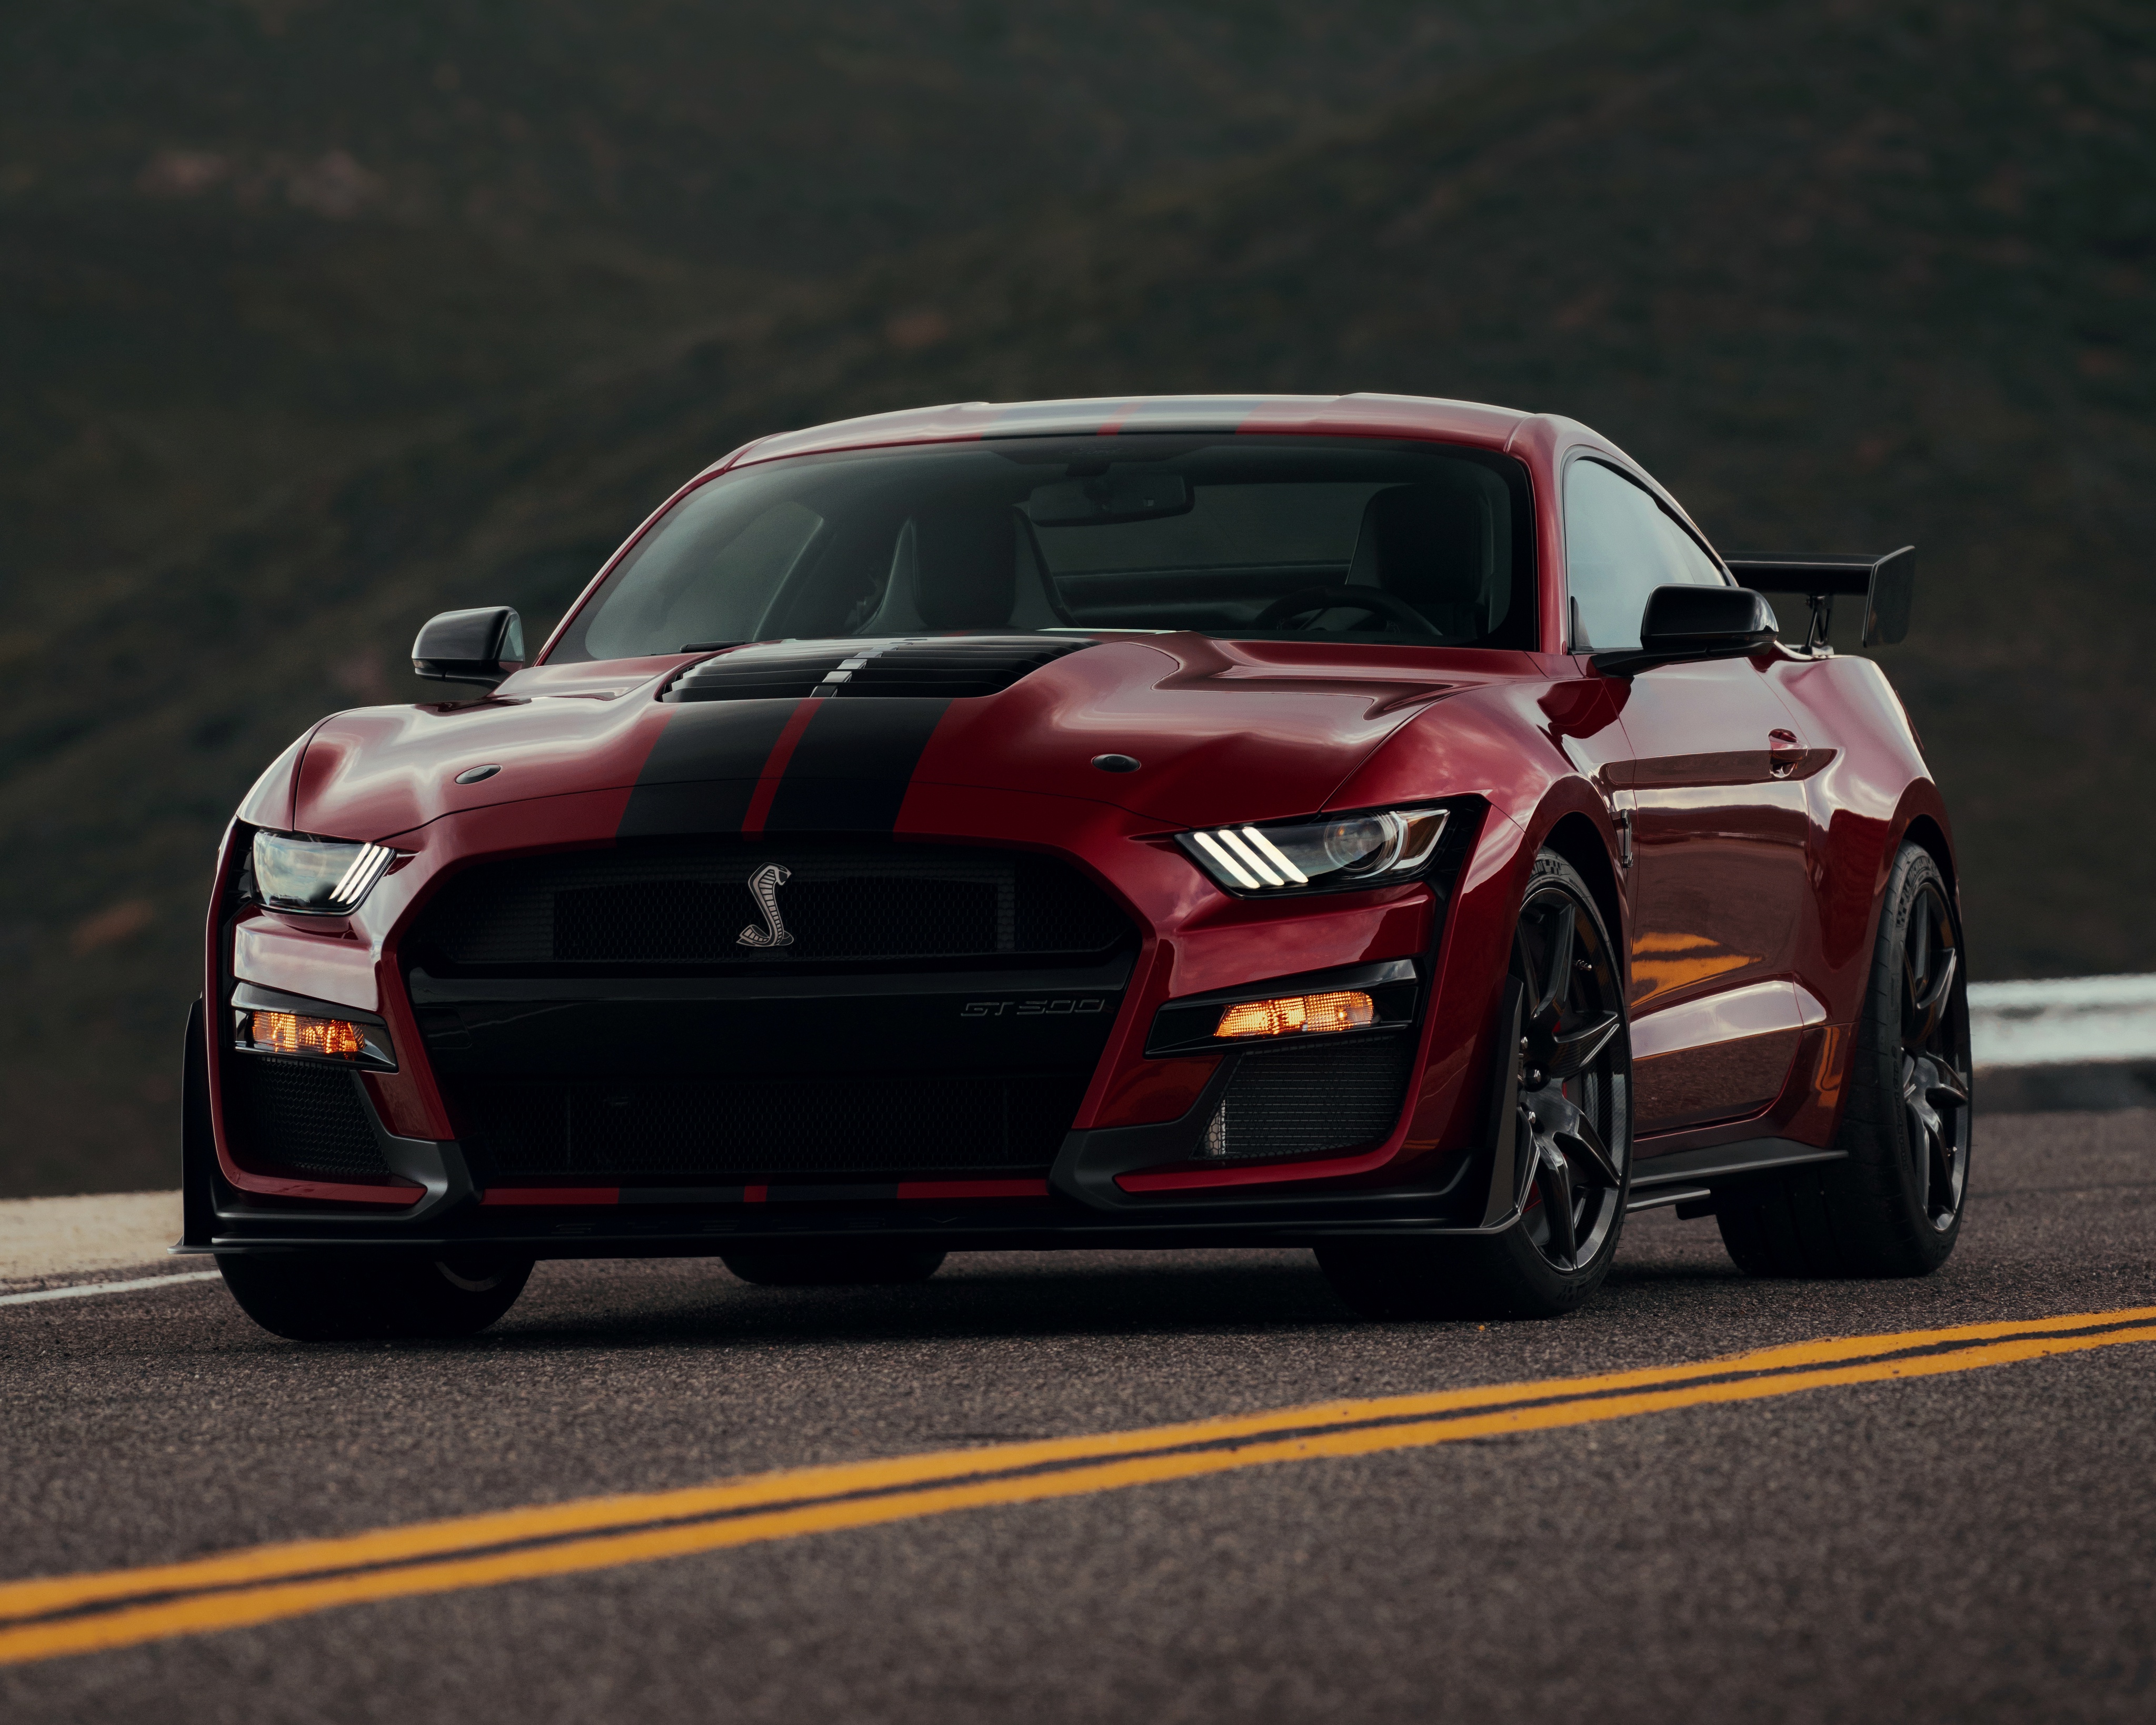 Vehicles Ford Mustang Shelby GT500 4k Ultra HD Wallpaper